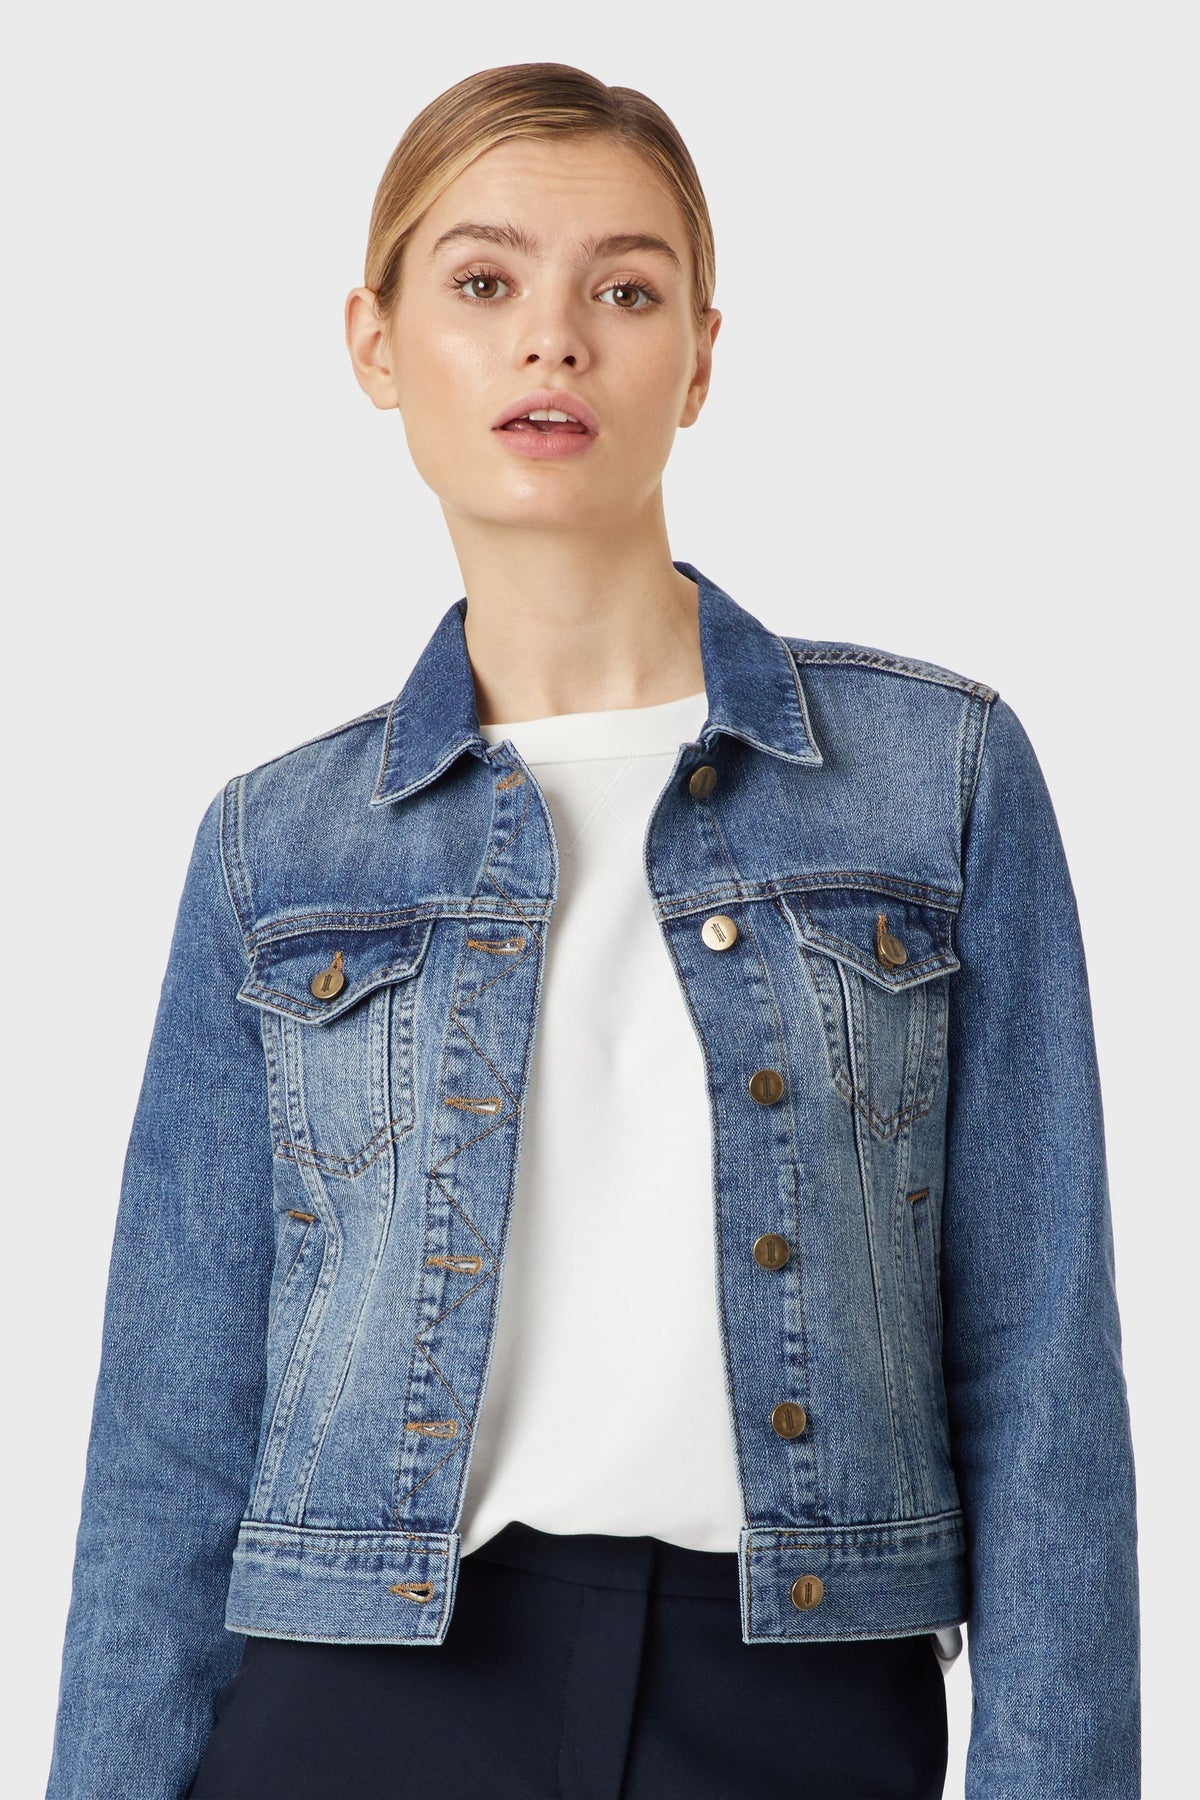 Classic blue denim jacket for women, featuring a clean, cropped silhouette and brass button detailing.